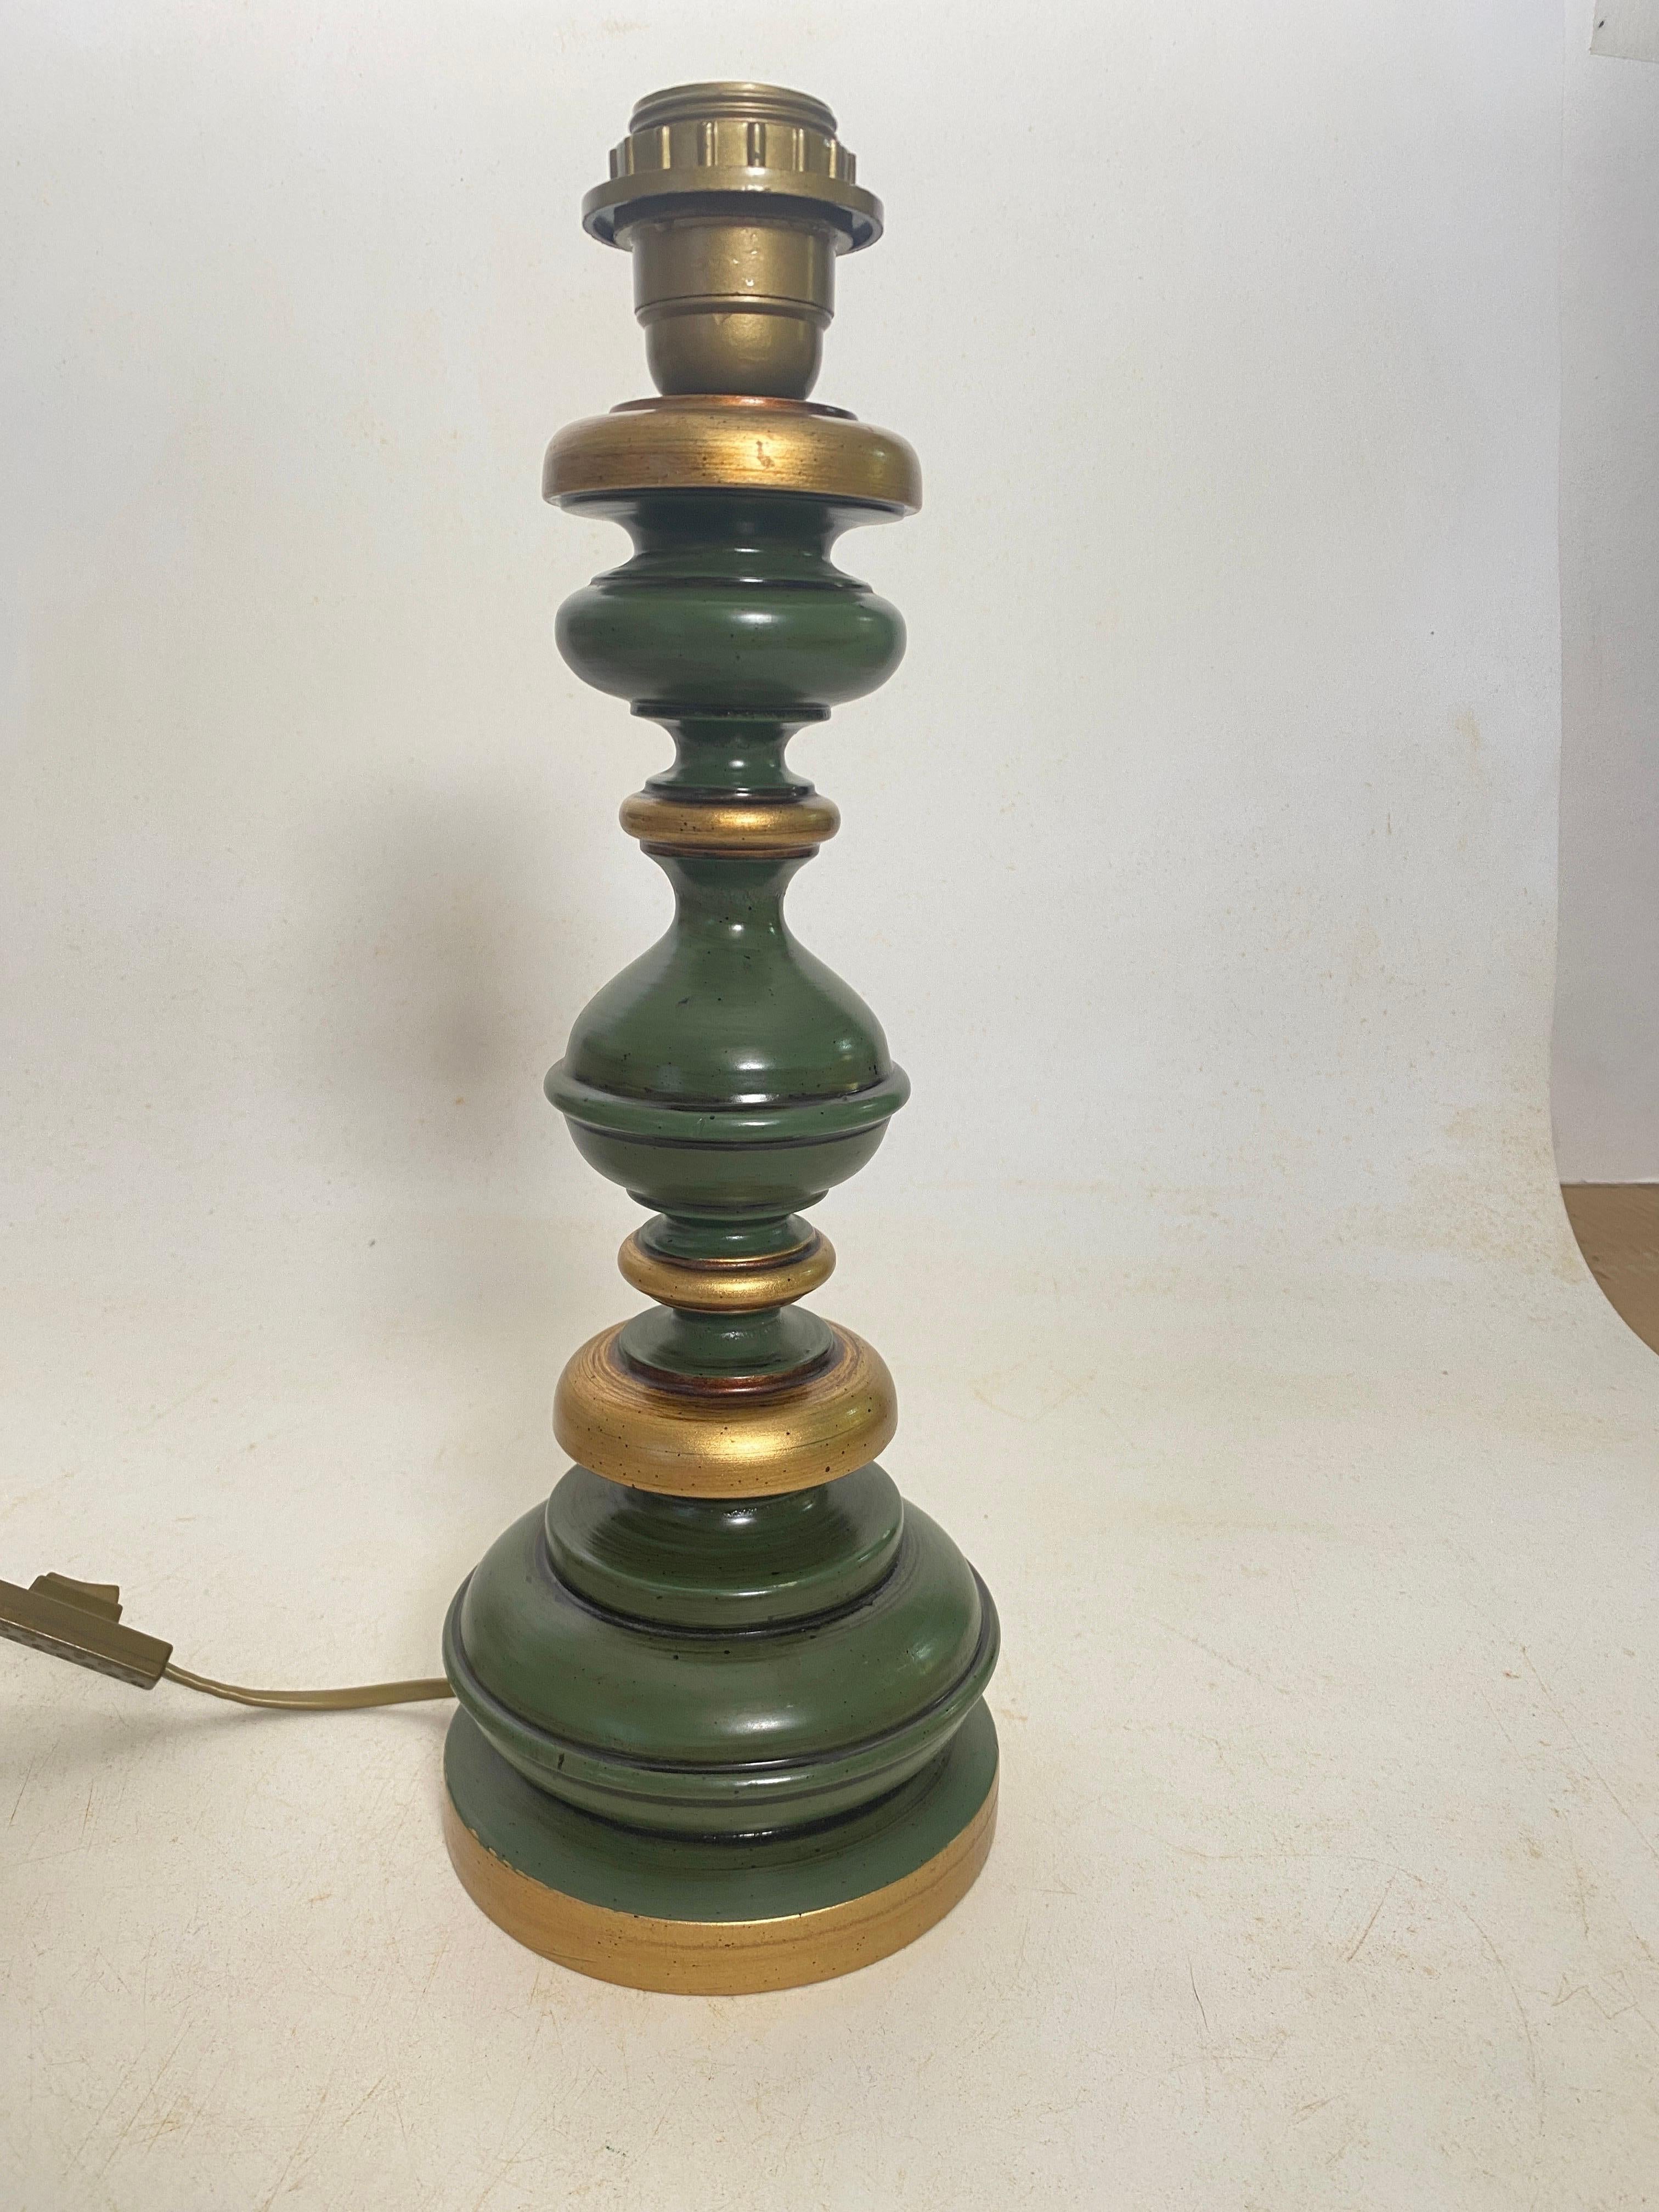 Wood Table Lamp, Made in France, Green Color, Circa 1970 For Sale 4